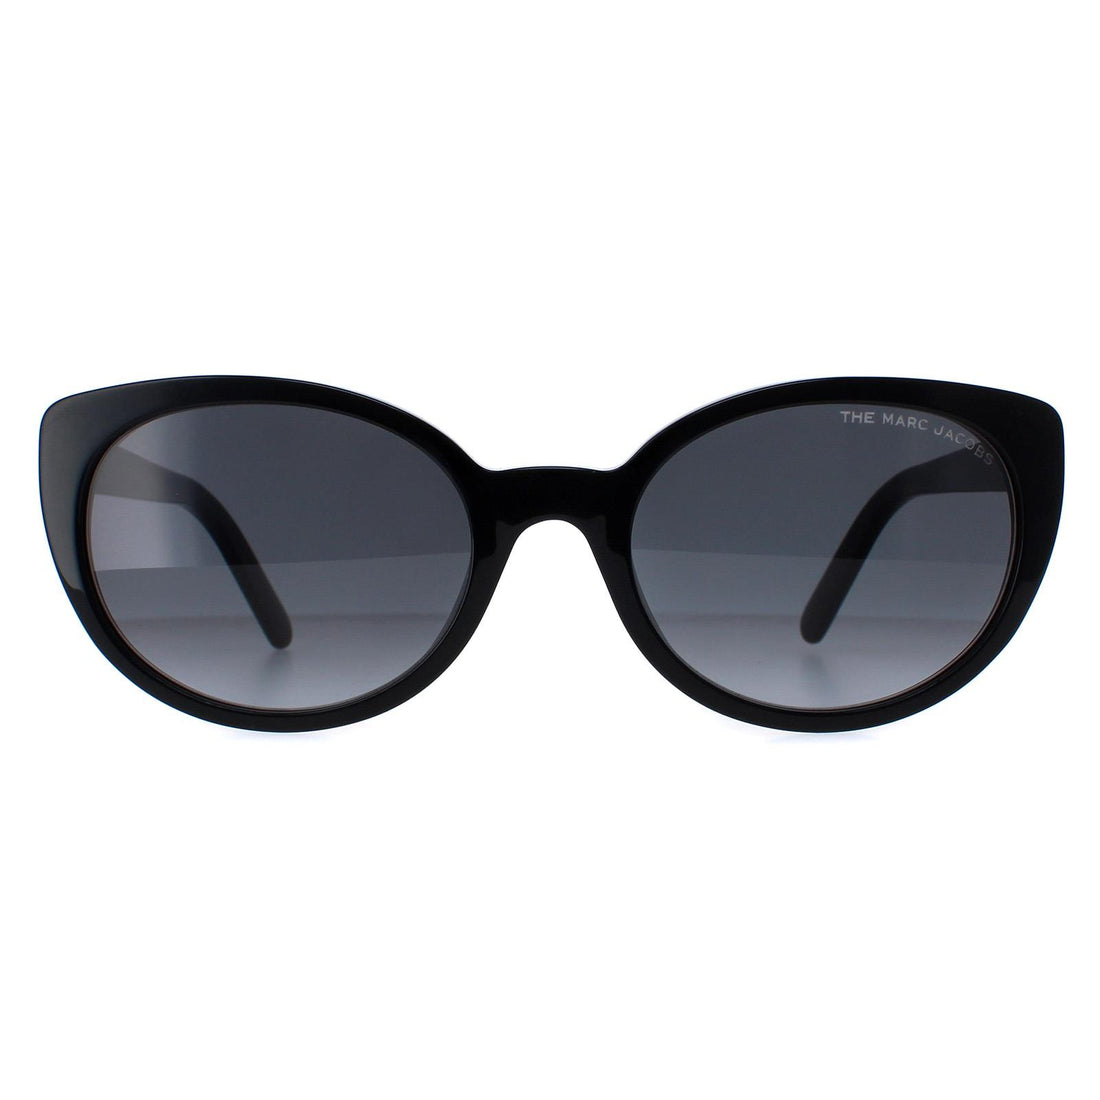 Details more than 264 marc jacobs sunglasses ireland